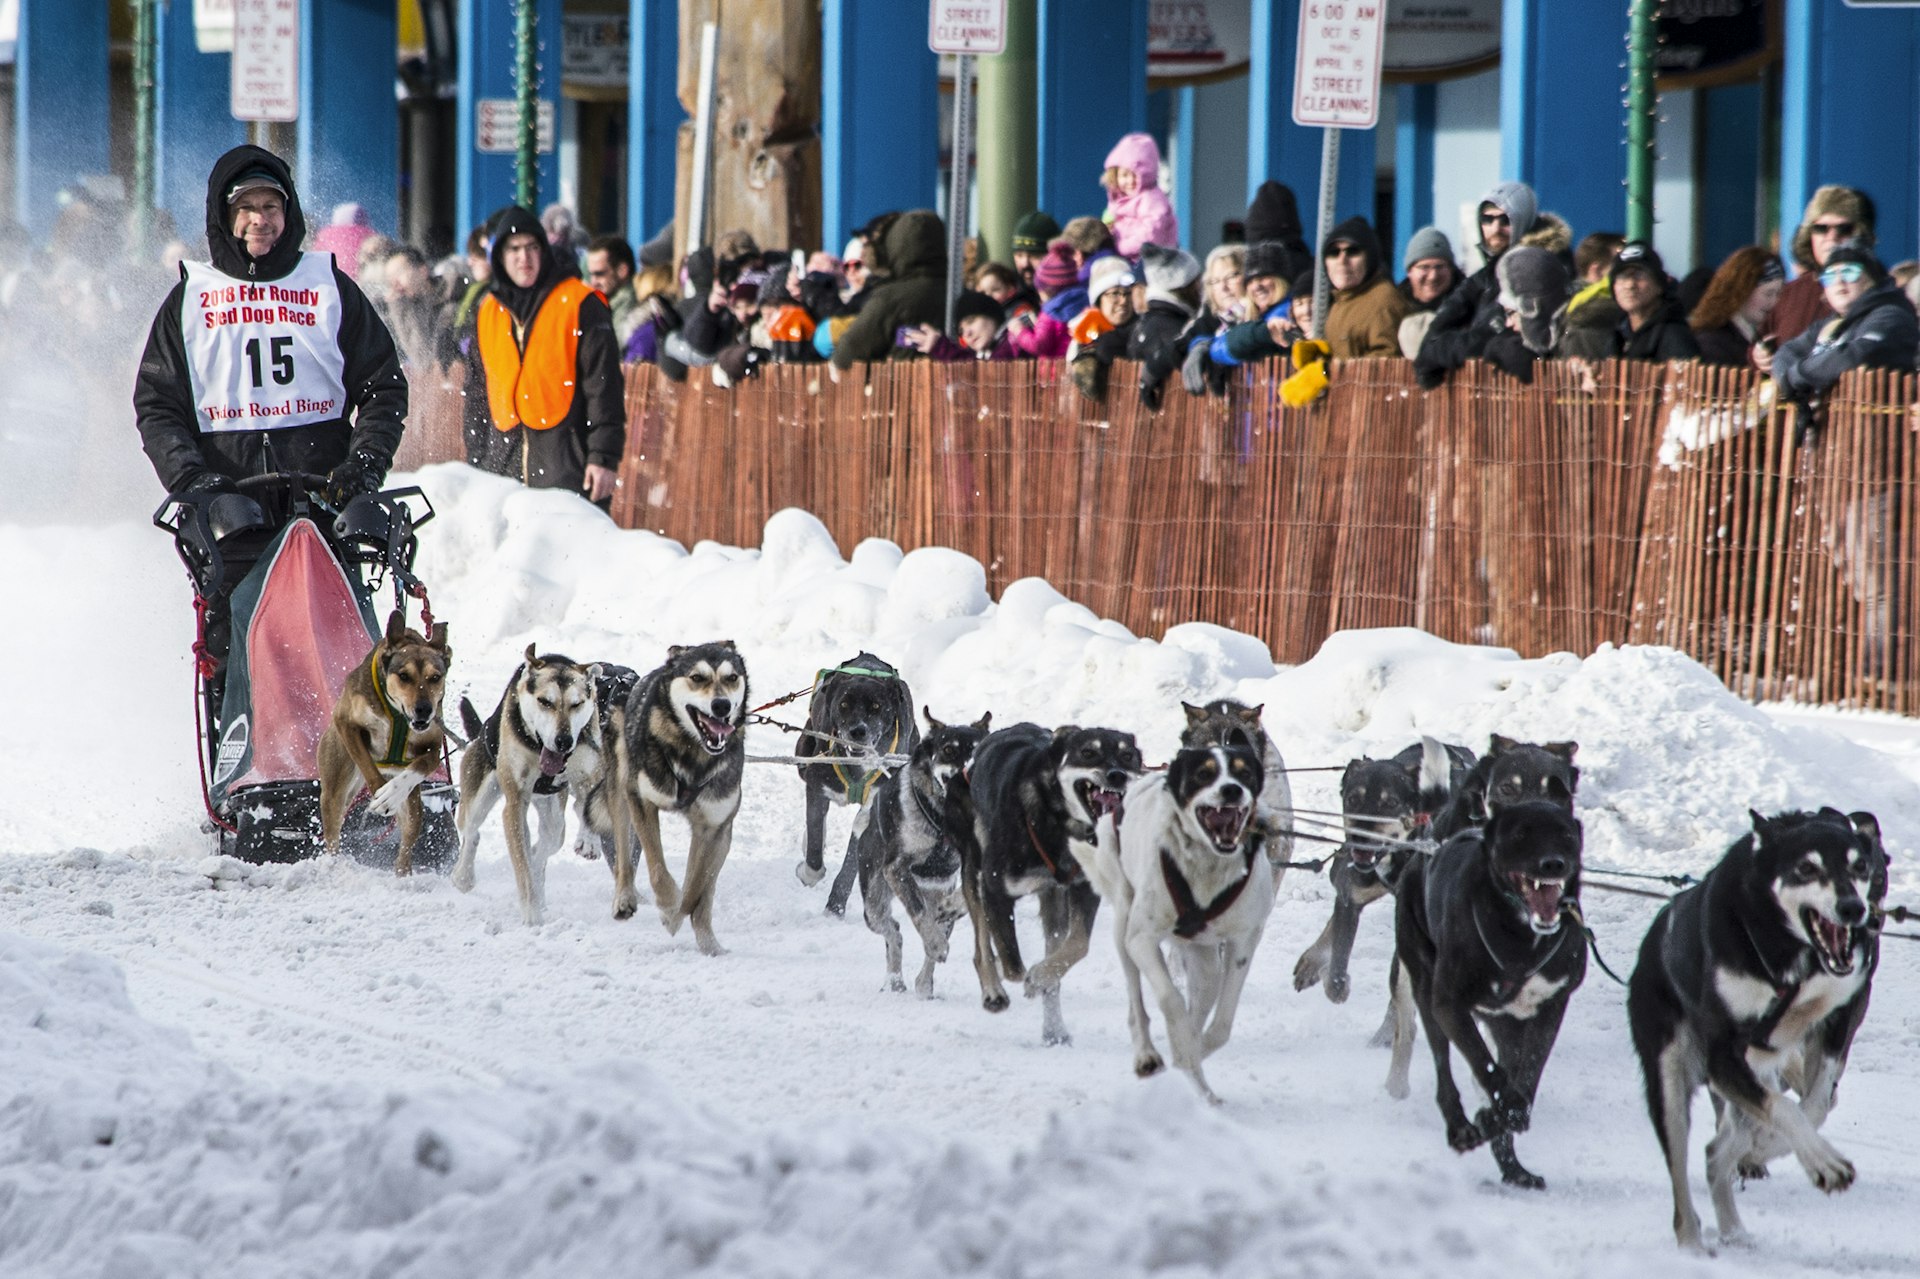 A dog sledder being pulled by a pack of dogs